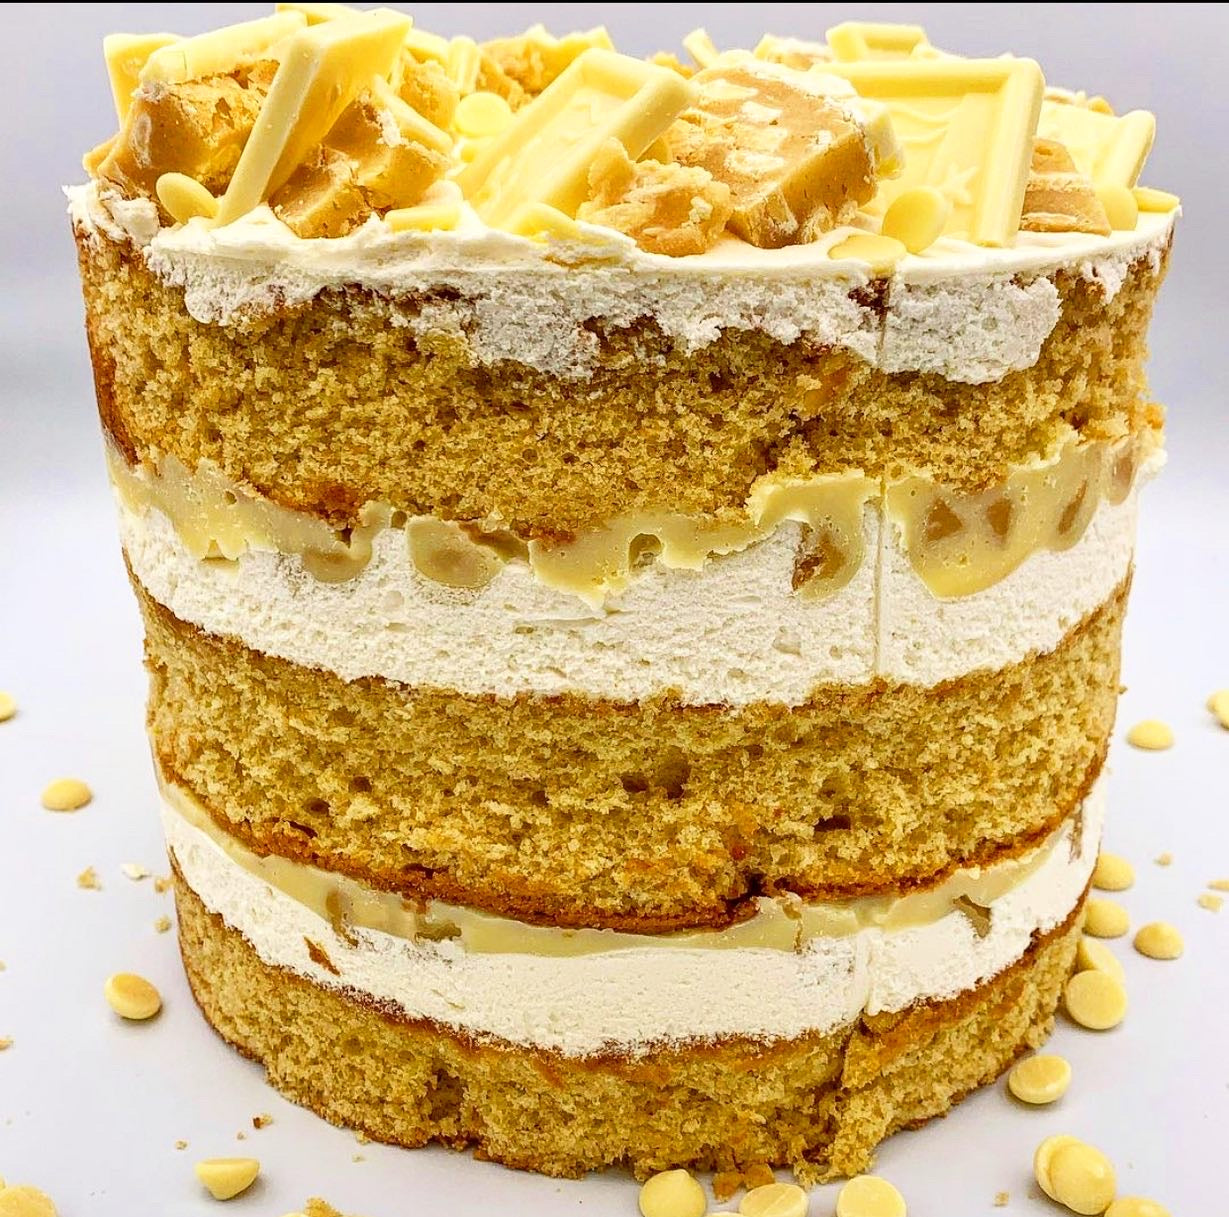 The Naked Layer Cakes